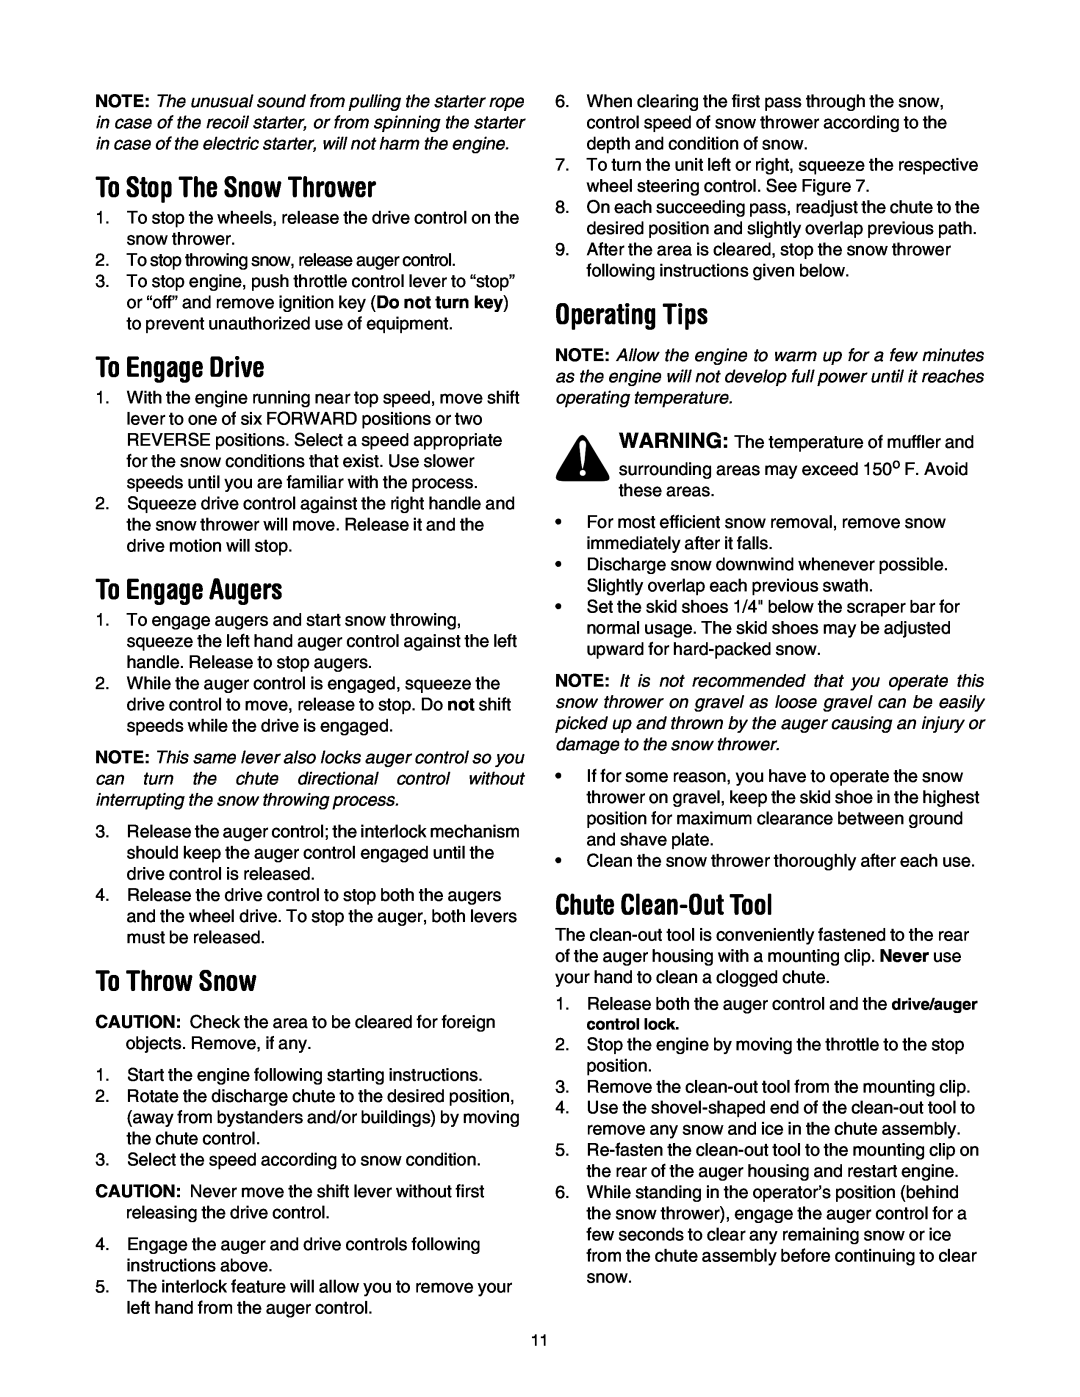 Yard-Man 5KL manual To Stop The Snow Thrower, To Engage Drive, To Engage Augers, To Throw Snow, Operating Tips 